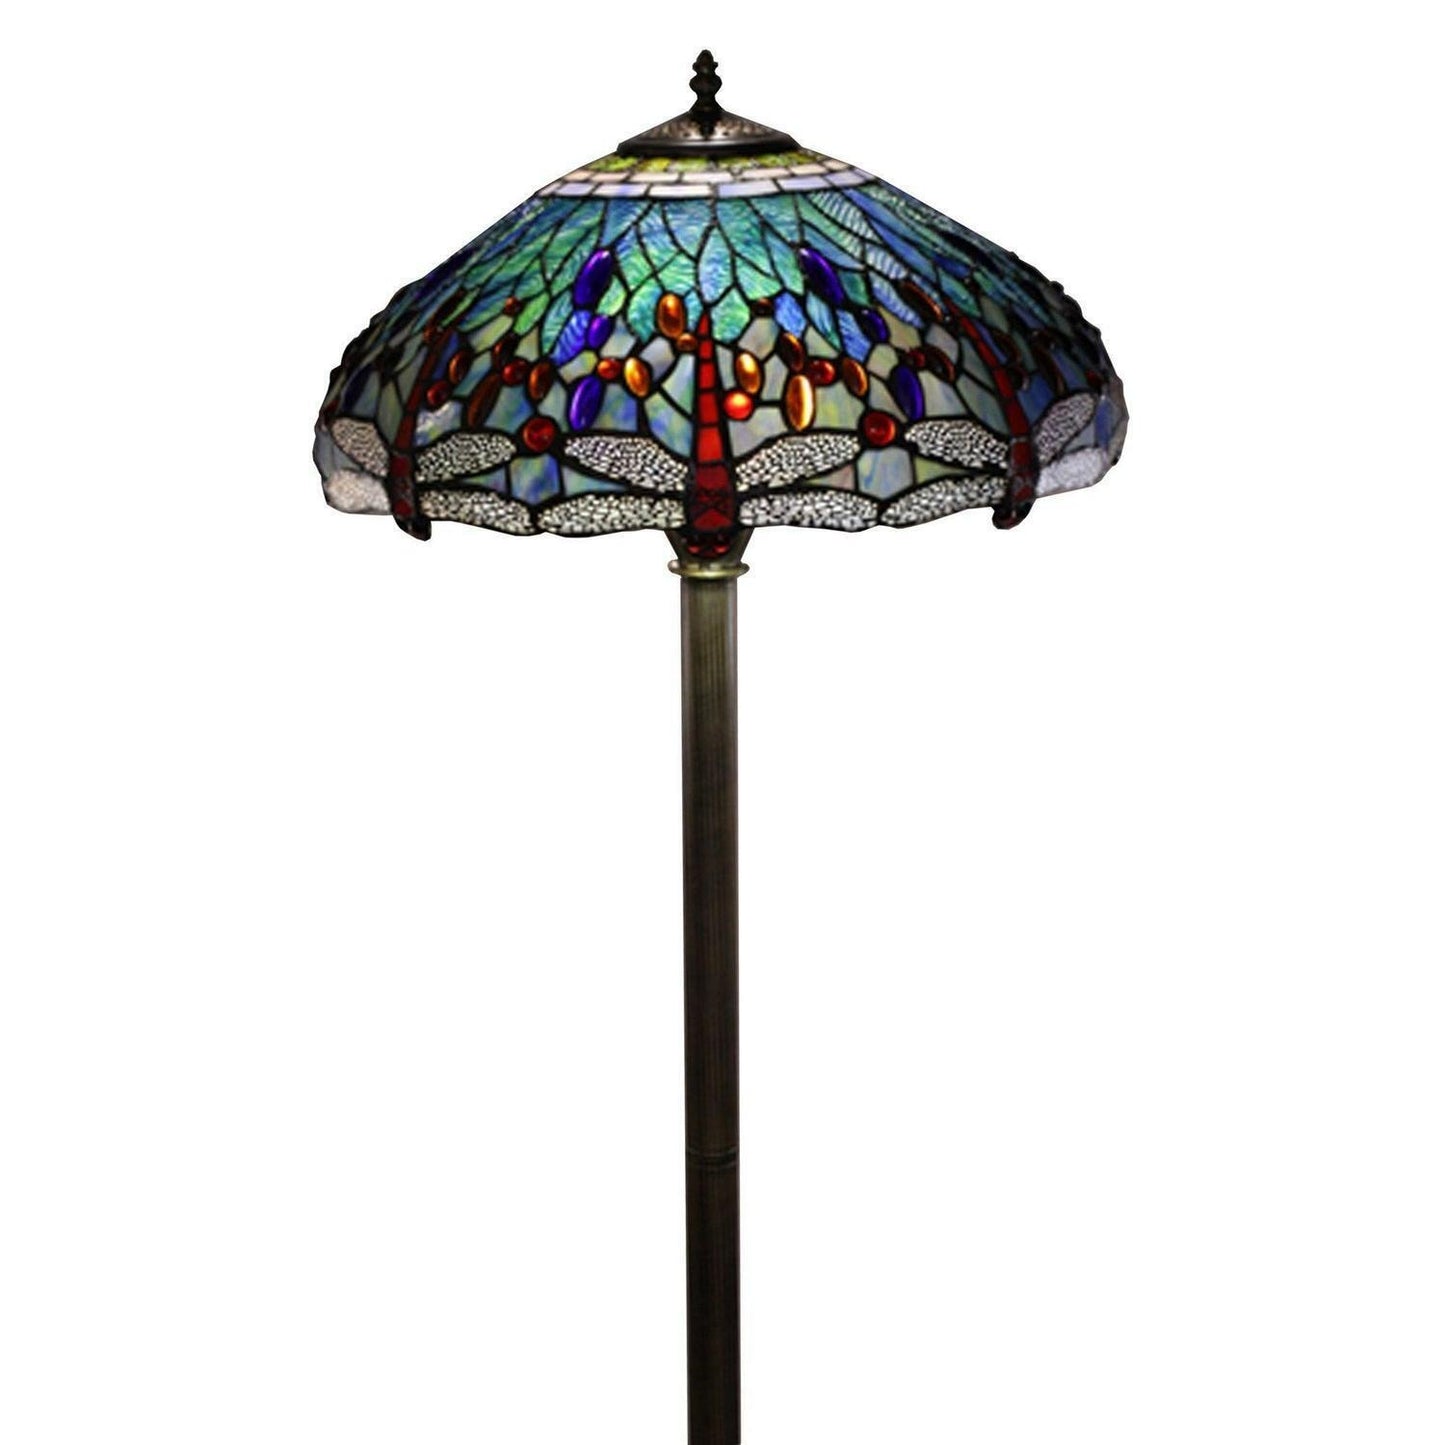 Blue Traditional Jeweled Dragonfly Floor Lamp Tiffany Style Stained Glass